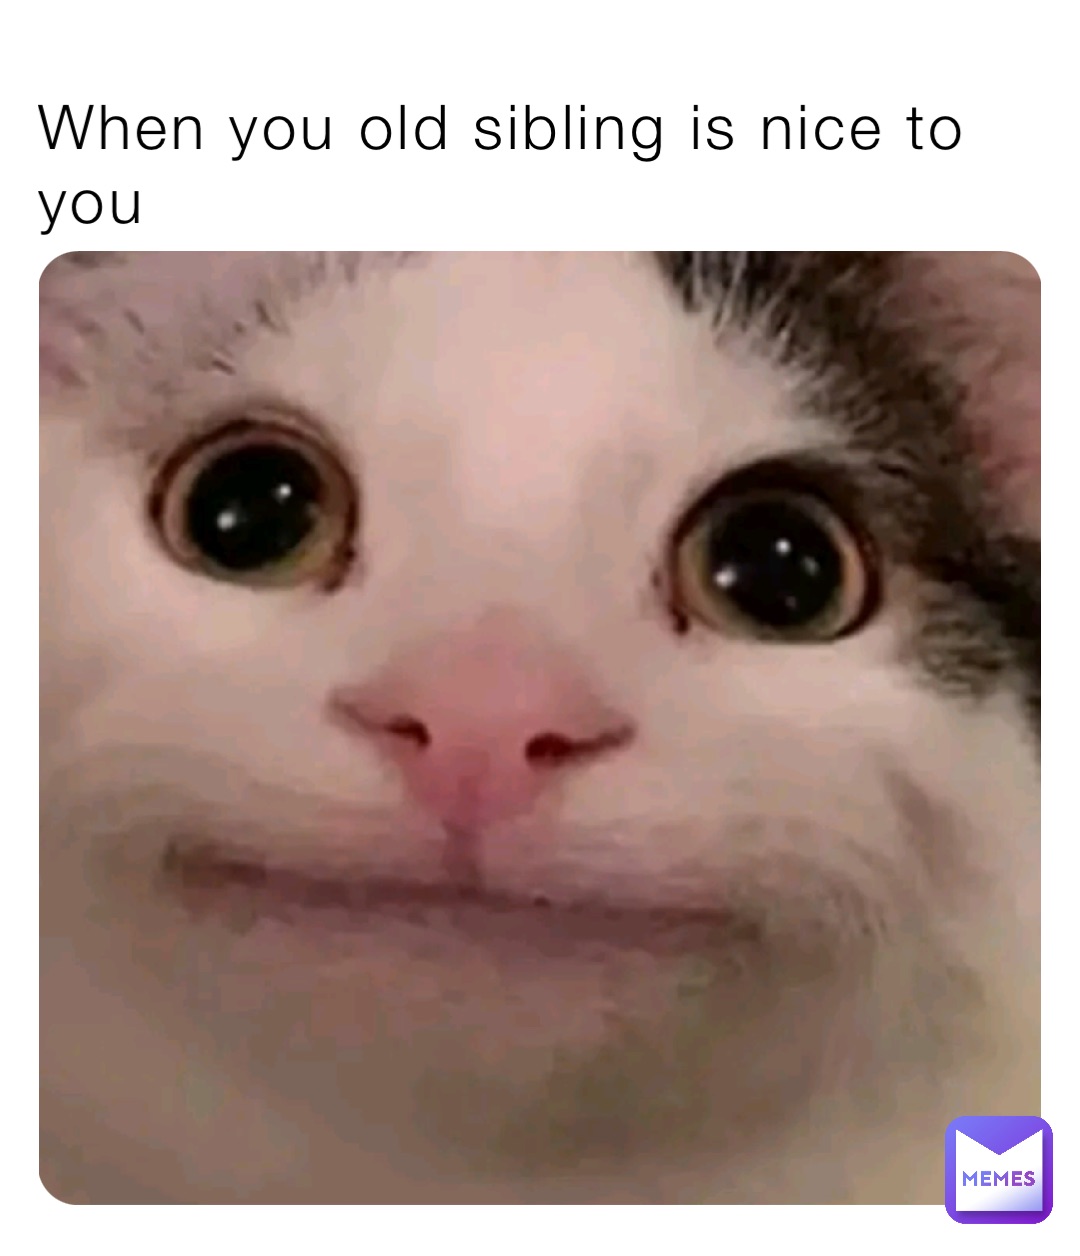 When you old sibling is nice to you